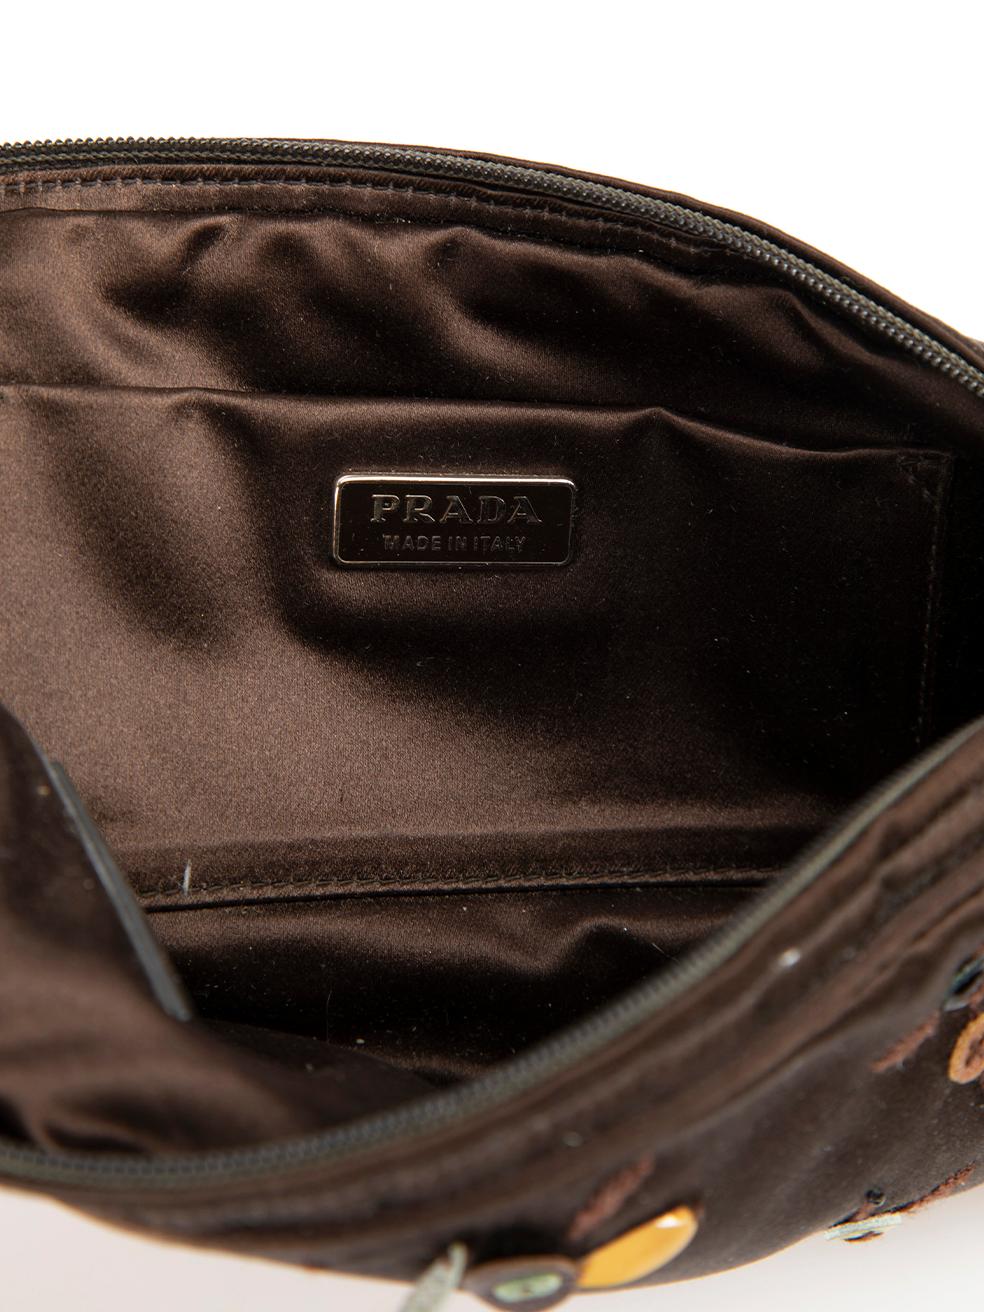 Prada Women's Vintage Brown Satin Embroidered Pouch For Sale 1